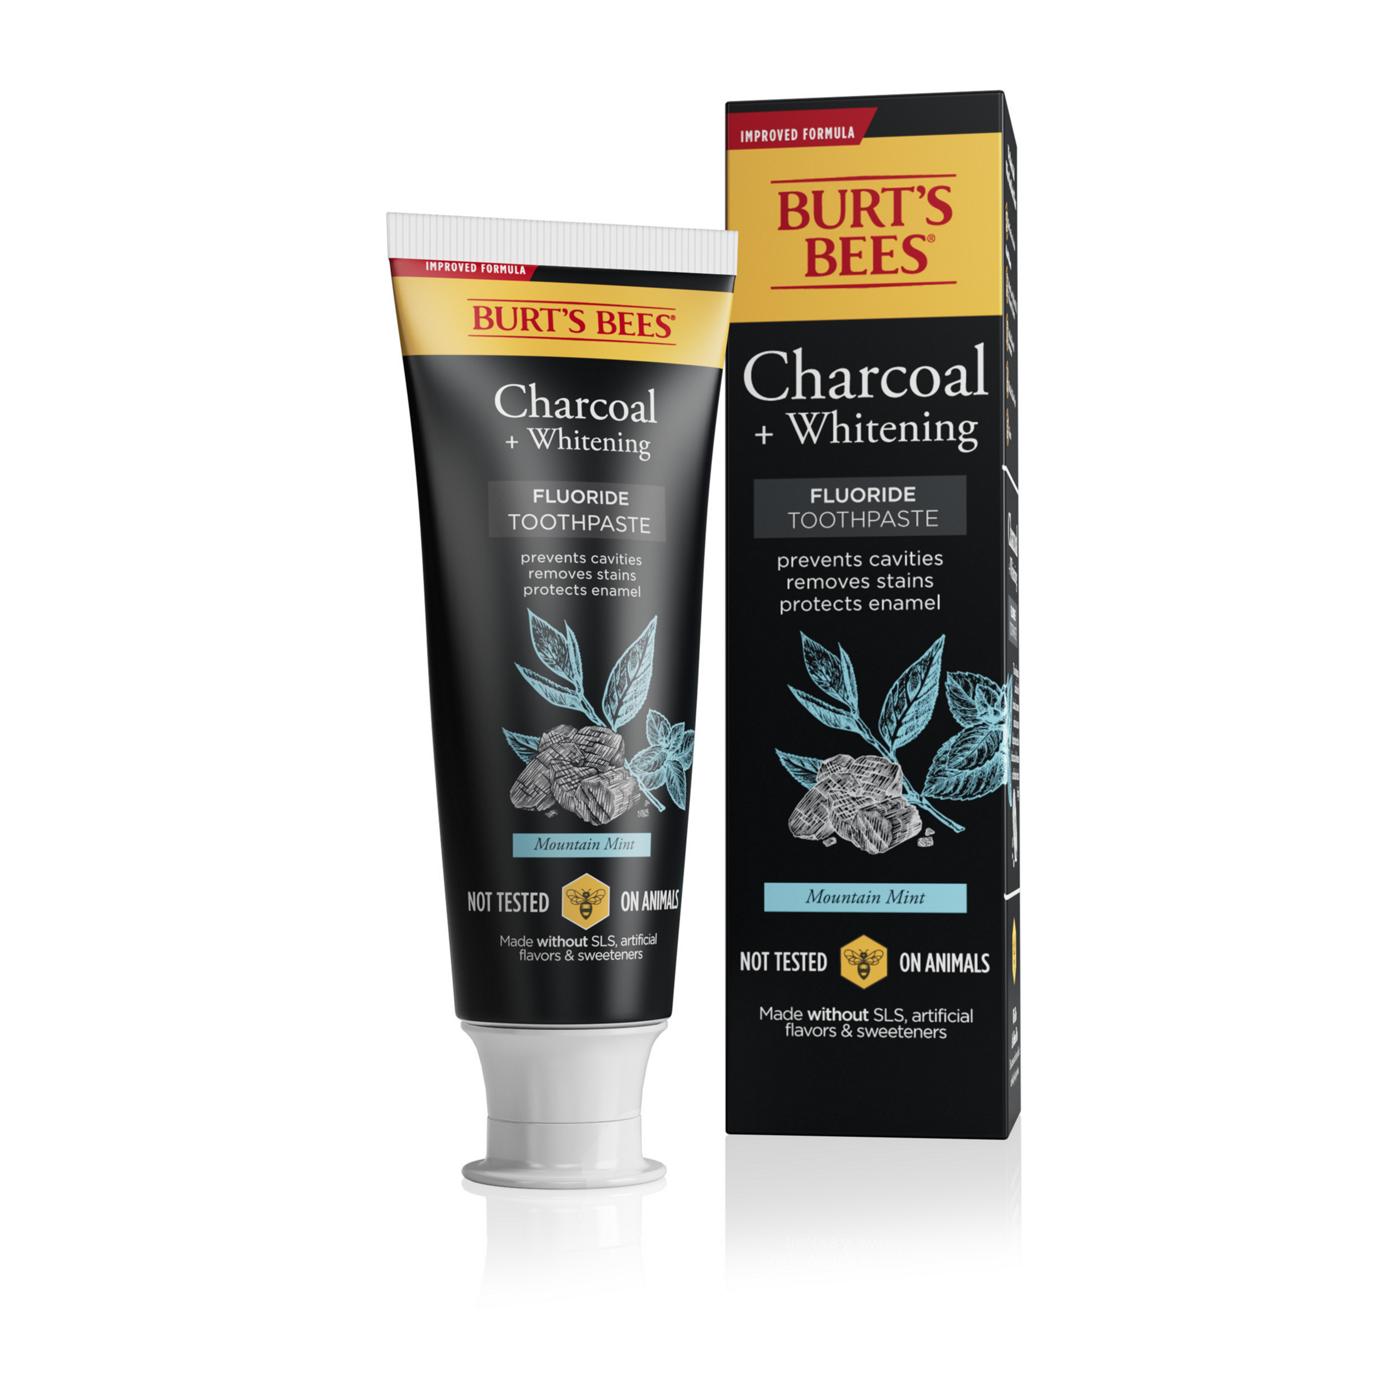 Burt's Bees Charcoal Fluoride Toothpaste - Charcoal Peppermint; image 6 of 7